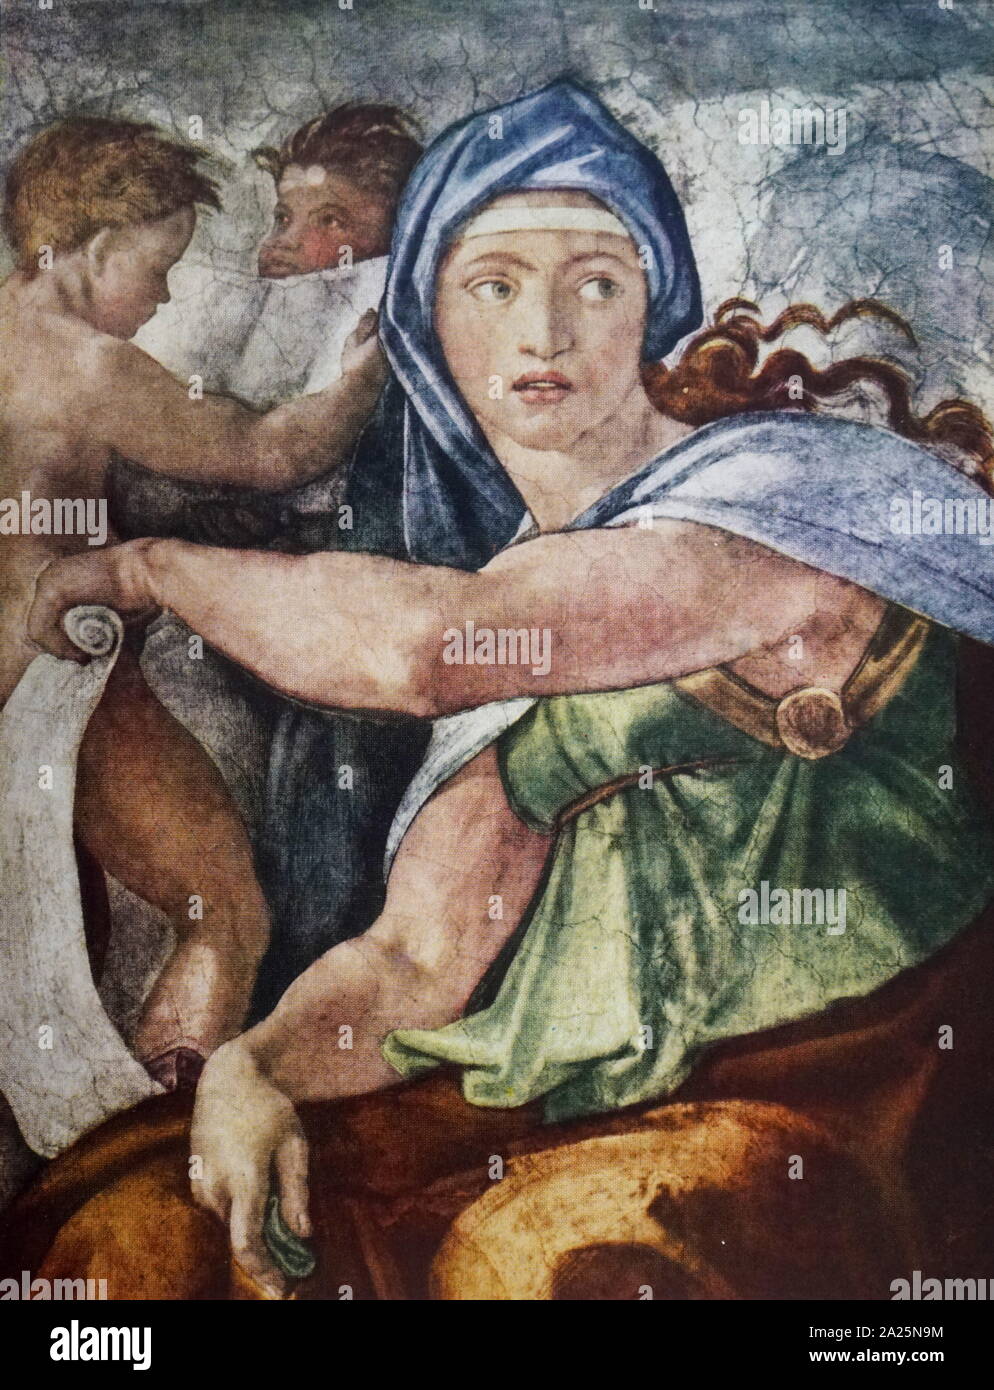 Detail from the Sistine Chapel 'The Delphic Sibyl' by Michelangelo. Michelangelo di Lodovico Buonarroti Simoni (1475-1564) an Italian sculptor, painter, architect and poet of the High Renaissance. Stock Photo